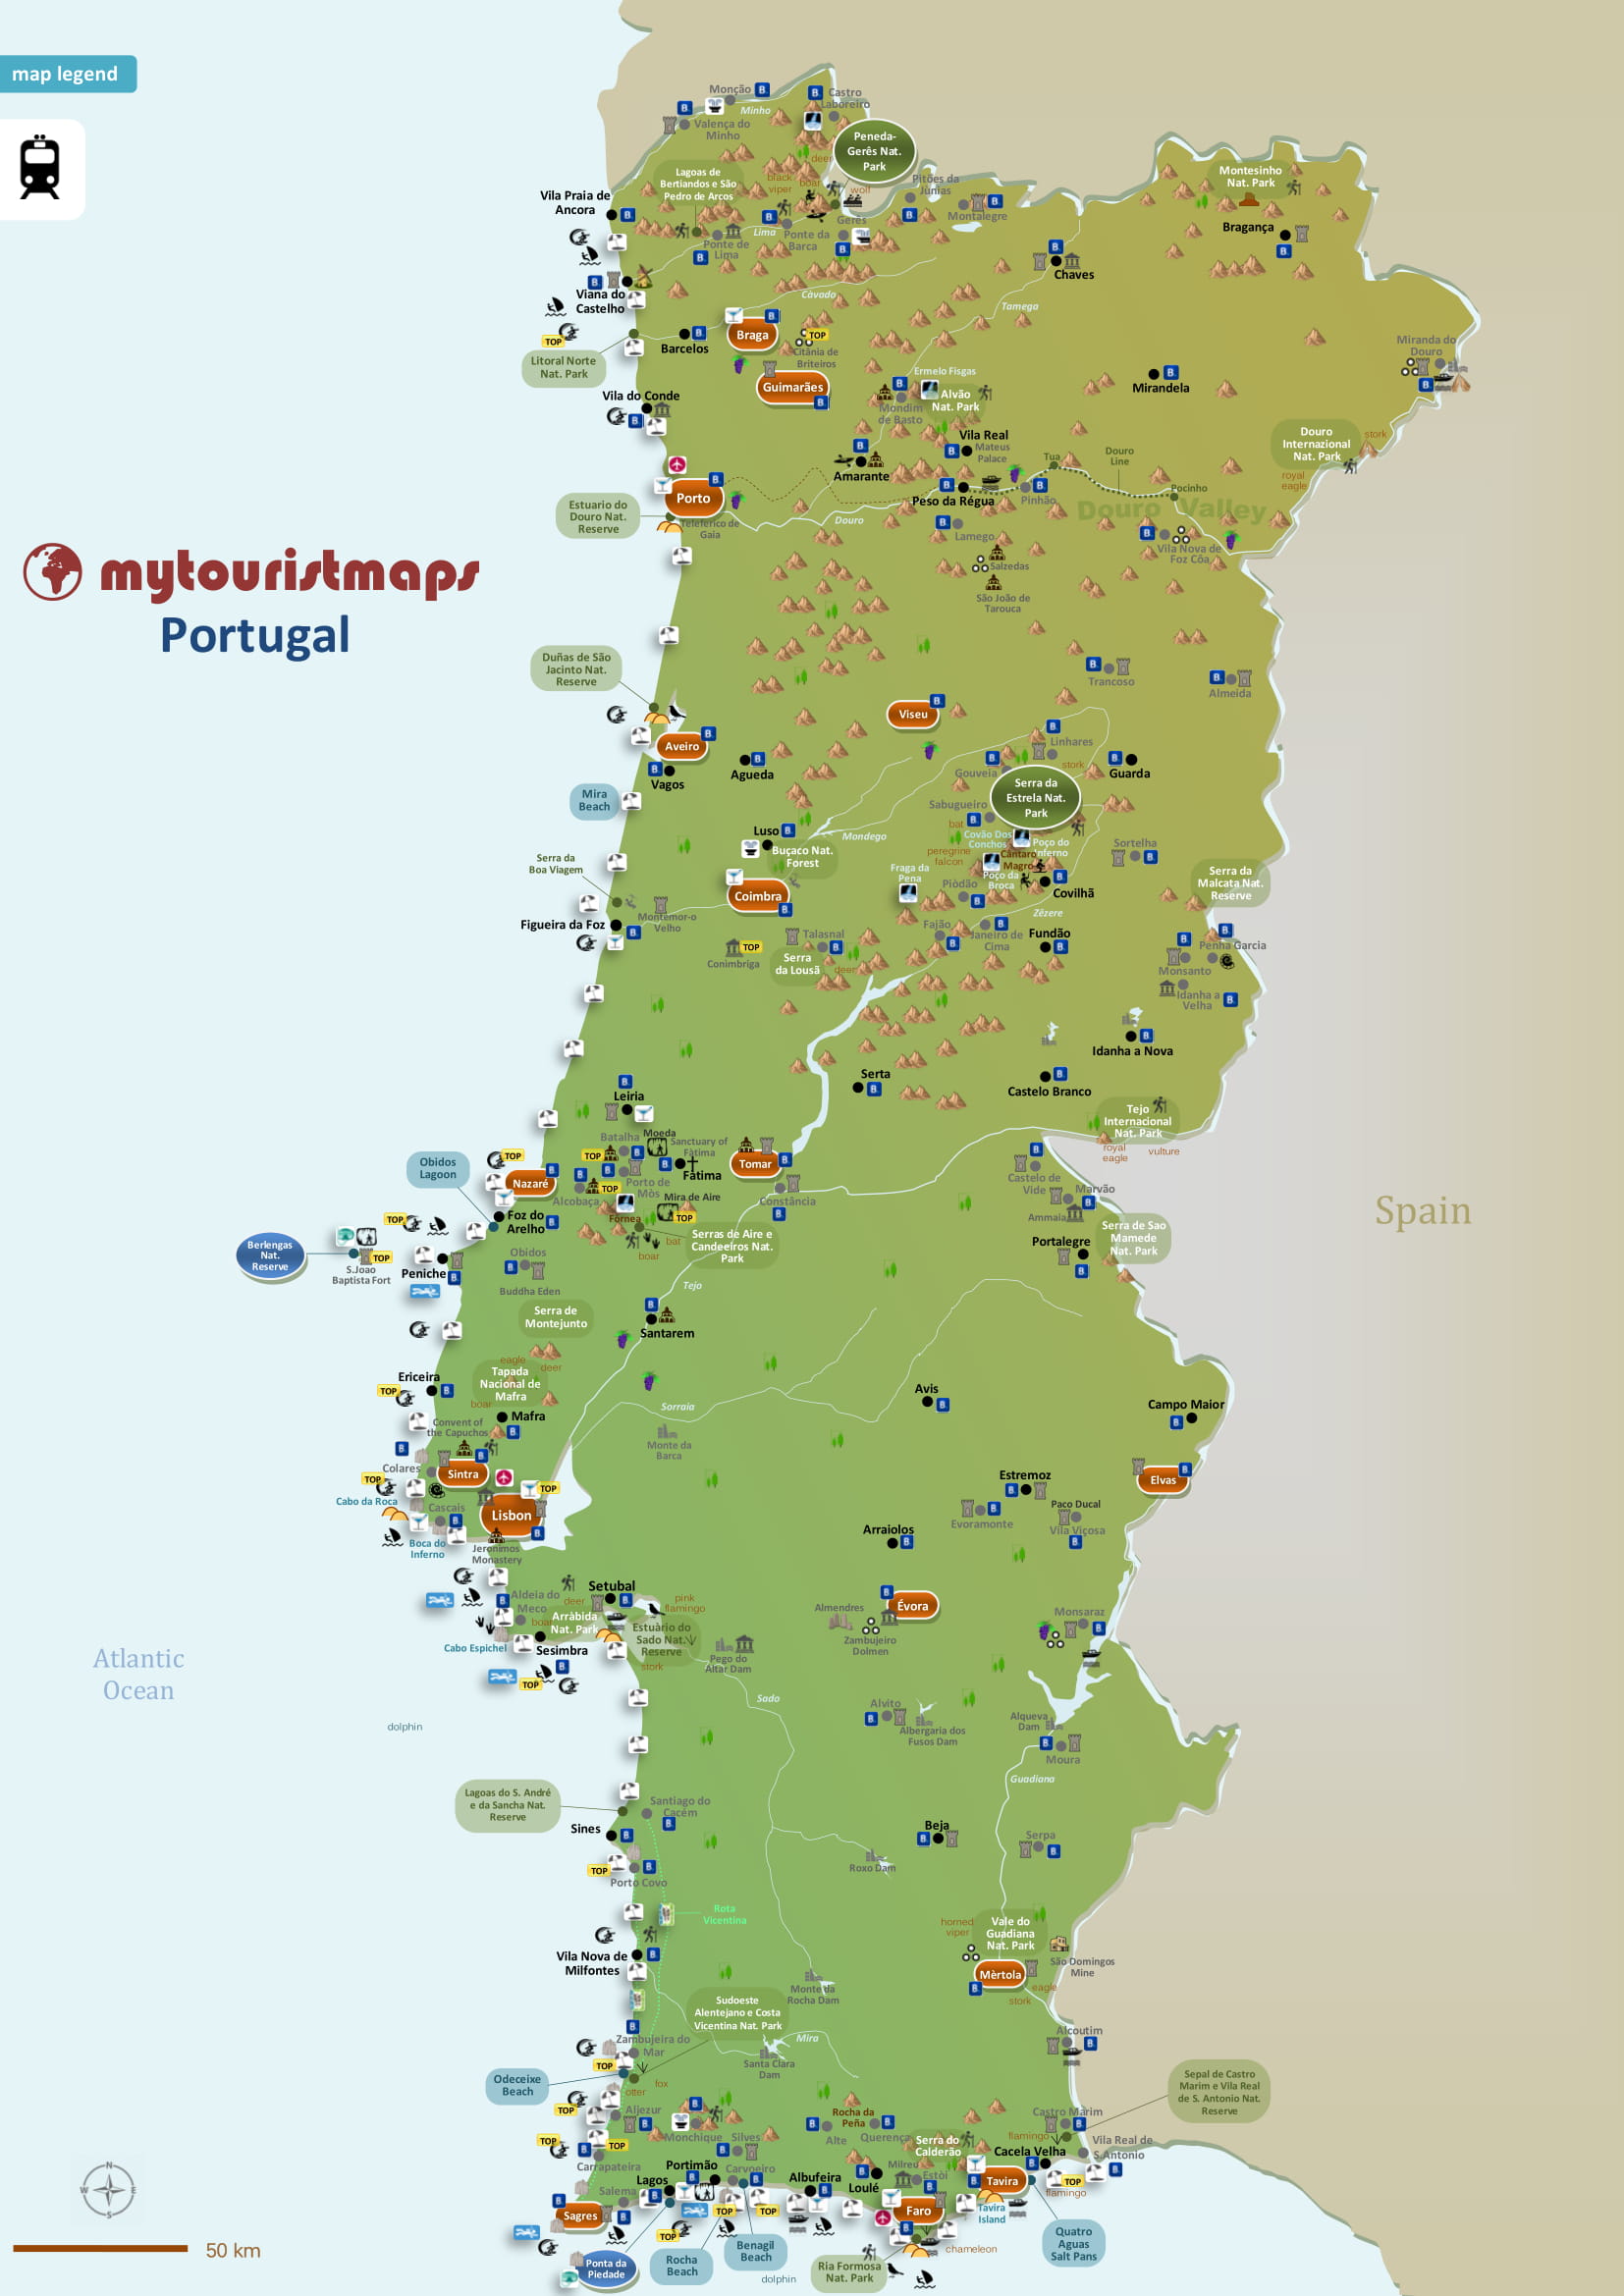 portugal tourism sector